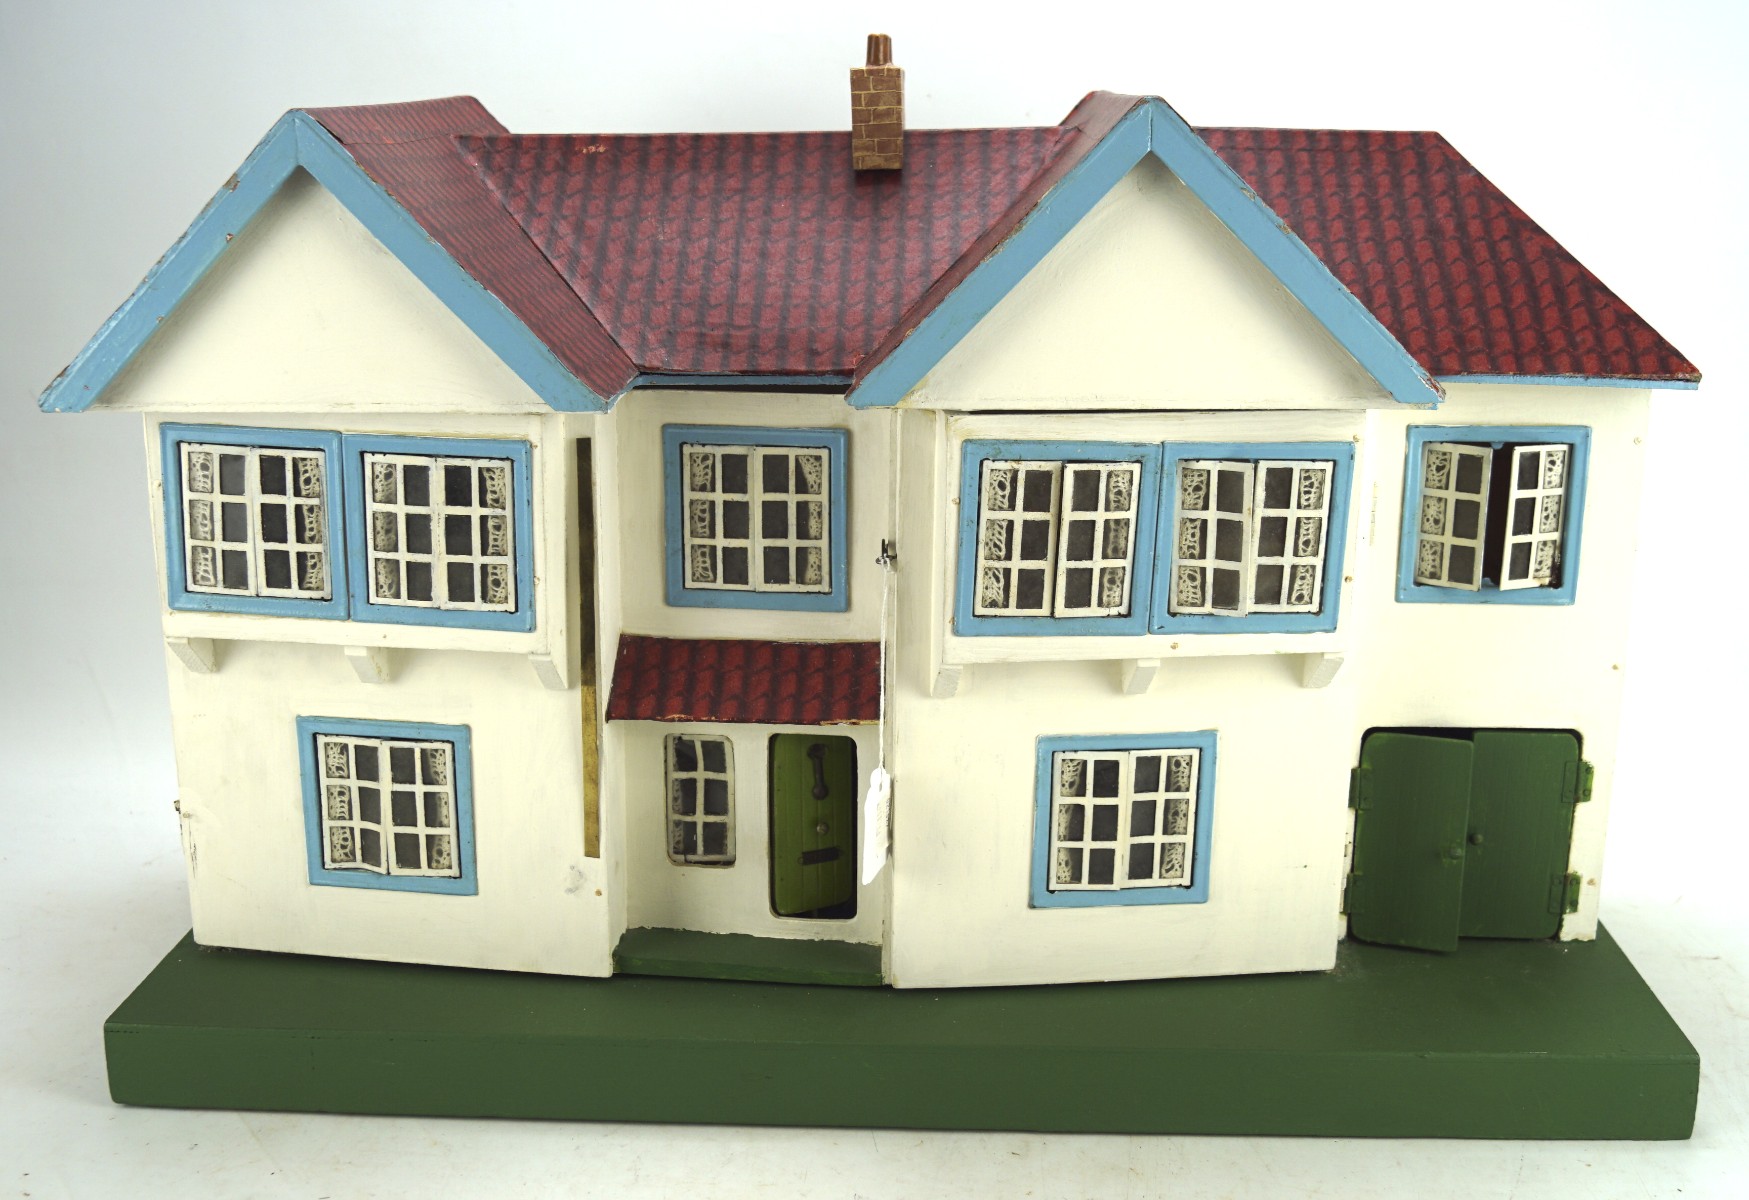 A vintage Tri-ang dolls house, c.